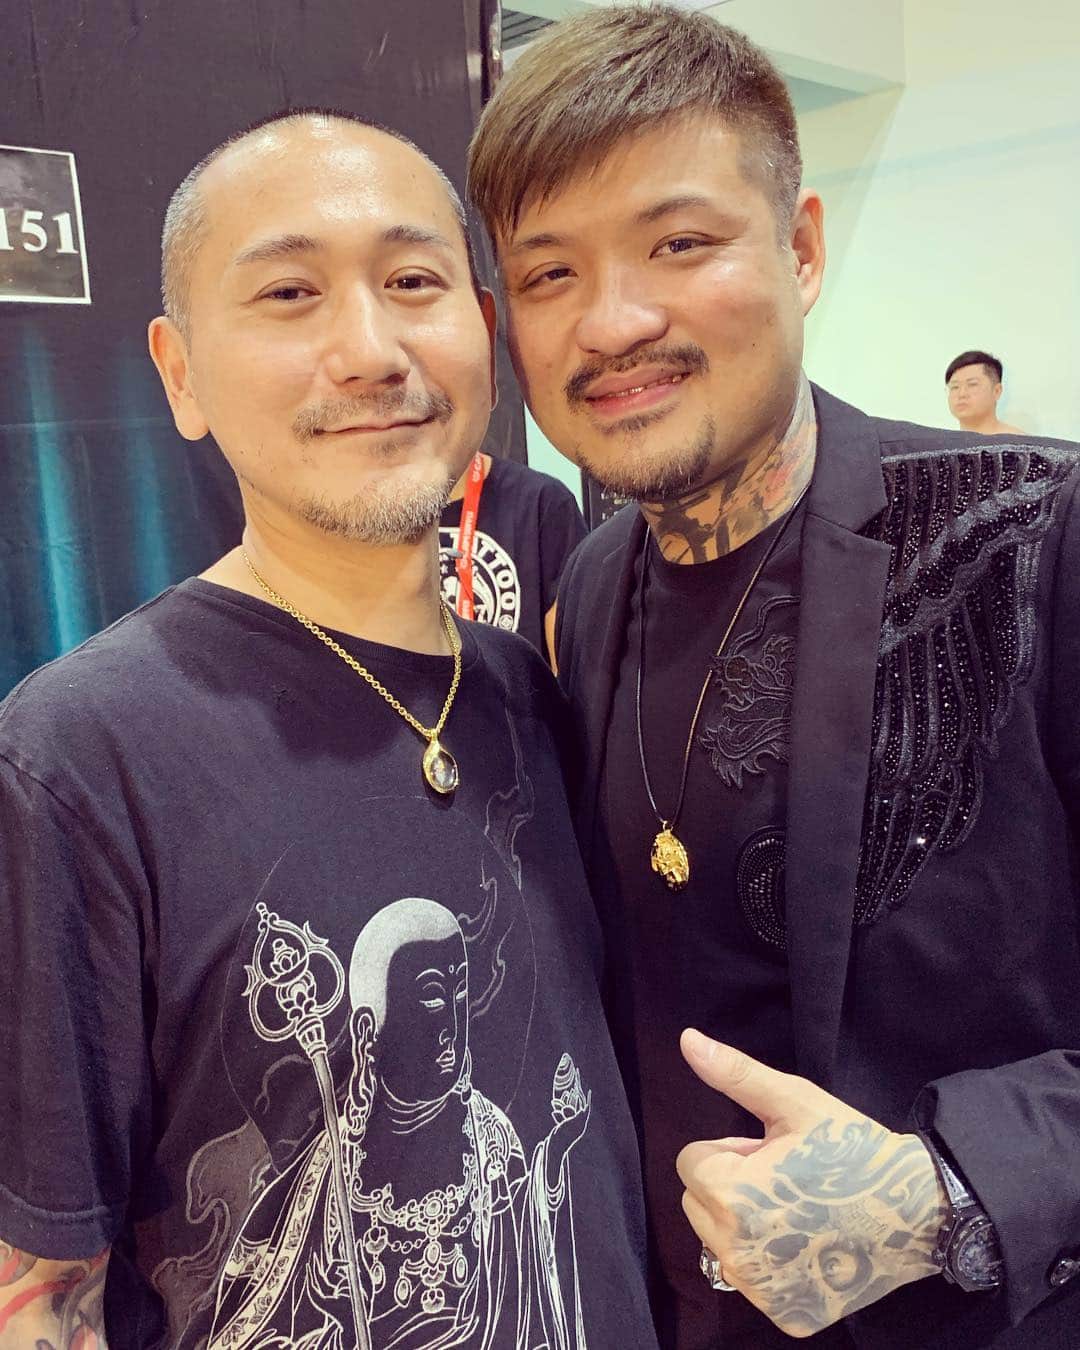 SHIGEのインスタグラム：「First of all,, Thank you so much for your hospitality @tai_yun_chen ,, Actually, I came back to Kaohsiung for the first time in 10 years,, Spend a really good times at @taiwantattooconvention ,, Such a good Tattoo Convention it was,, #taiwantattooconvention #taiwan #kaohsiung」